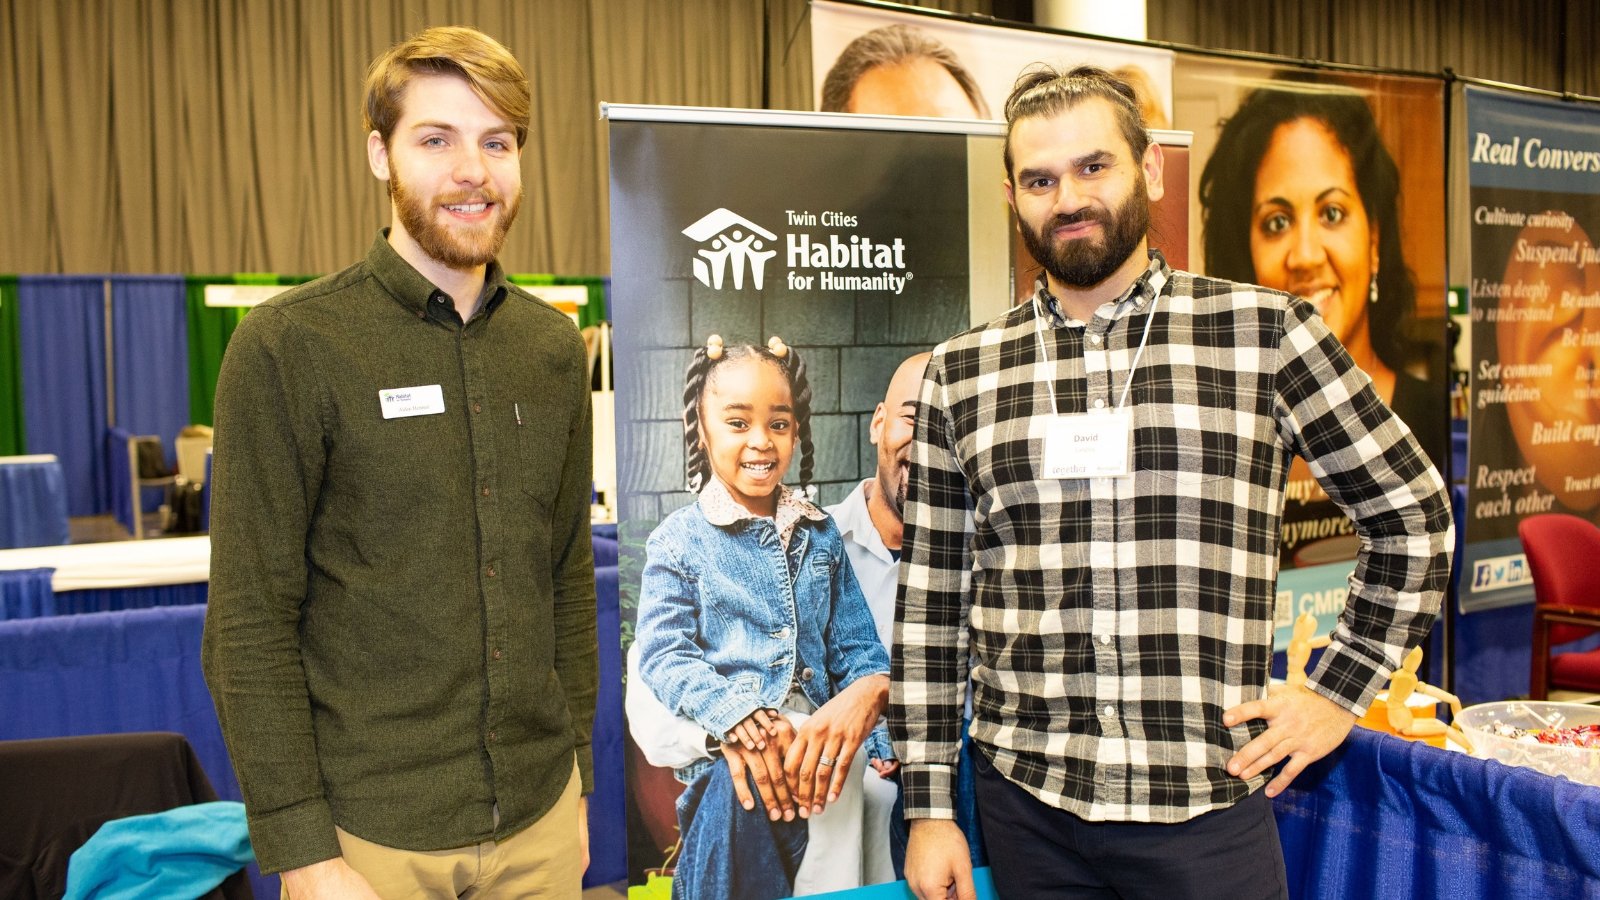 Two AmeriCorps Members at an event standing in front of a Habitat banner